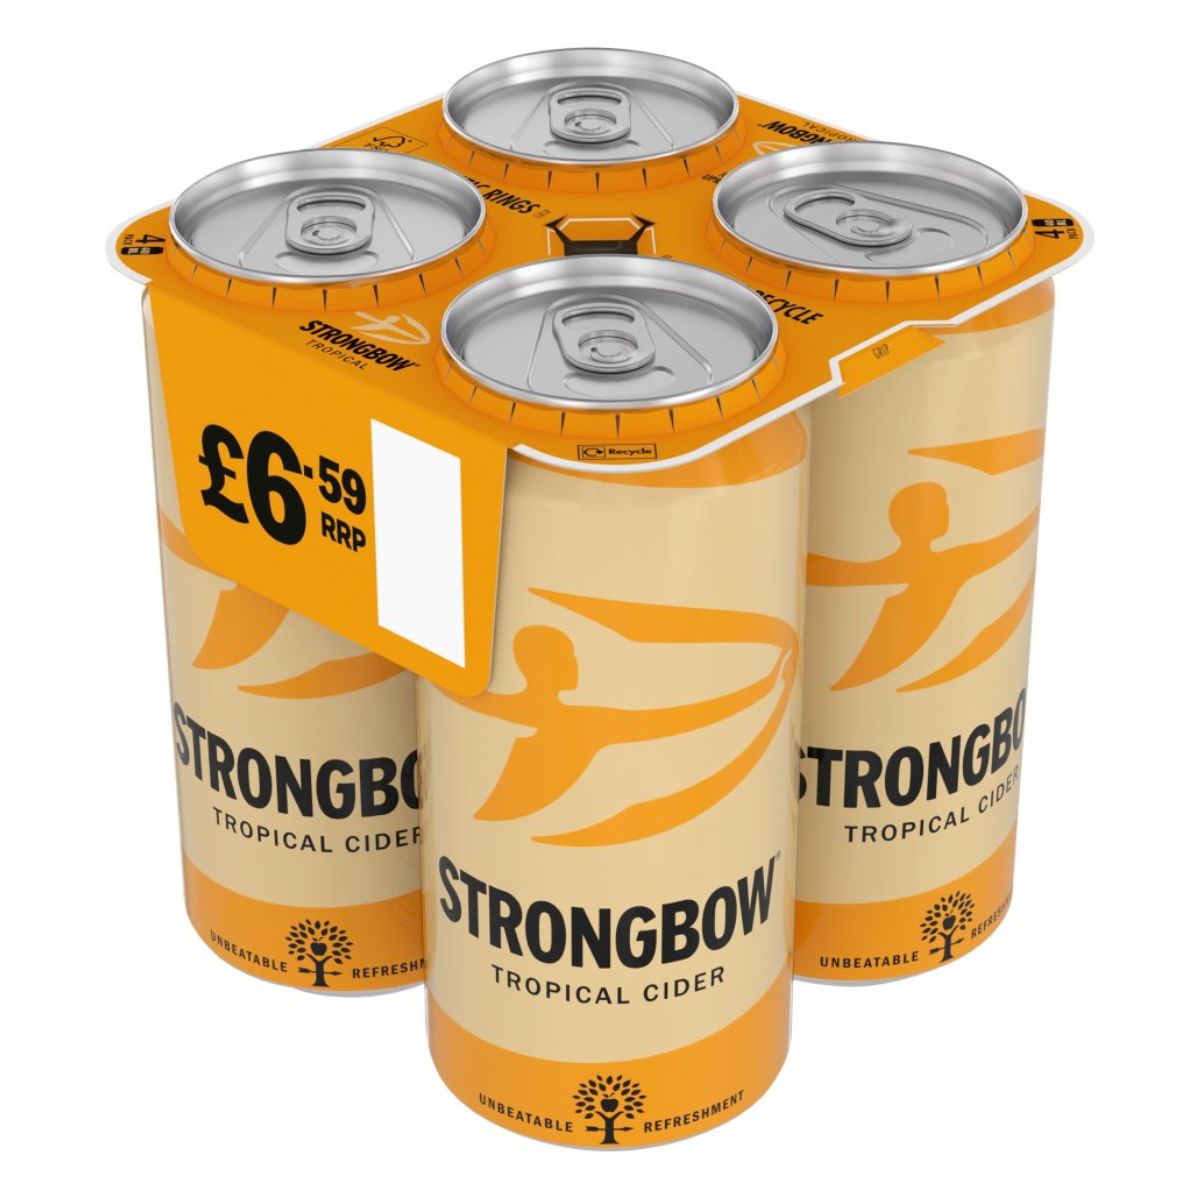 Four cans of Strongbow - Tropical Cider Can (4.0% ABV) - 4 x 440ml on a white background.